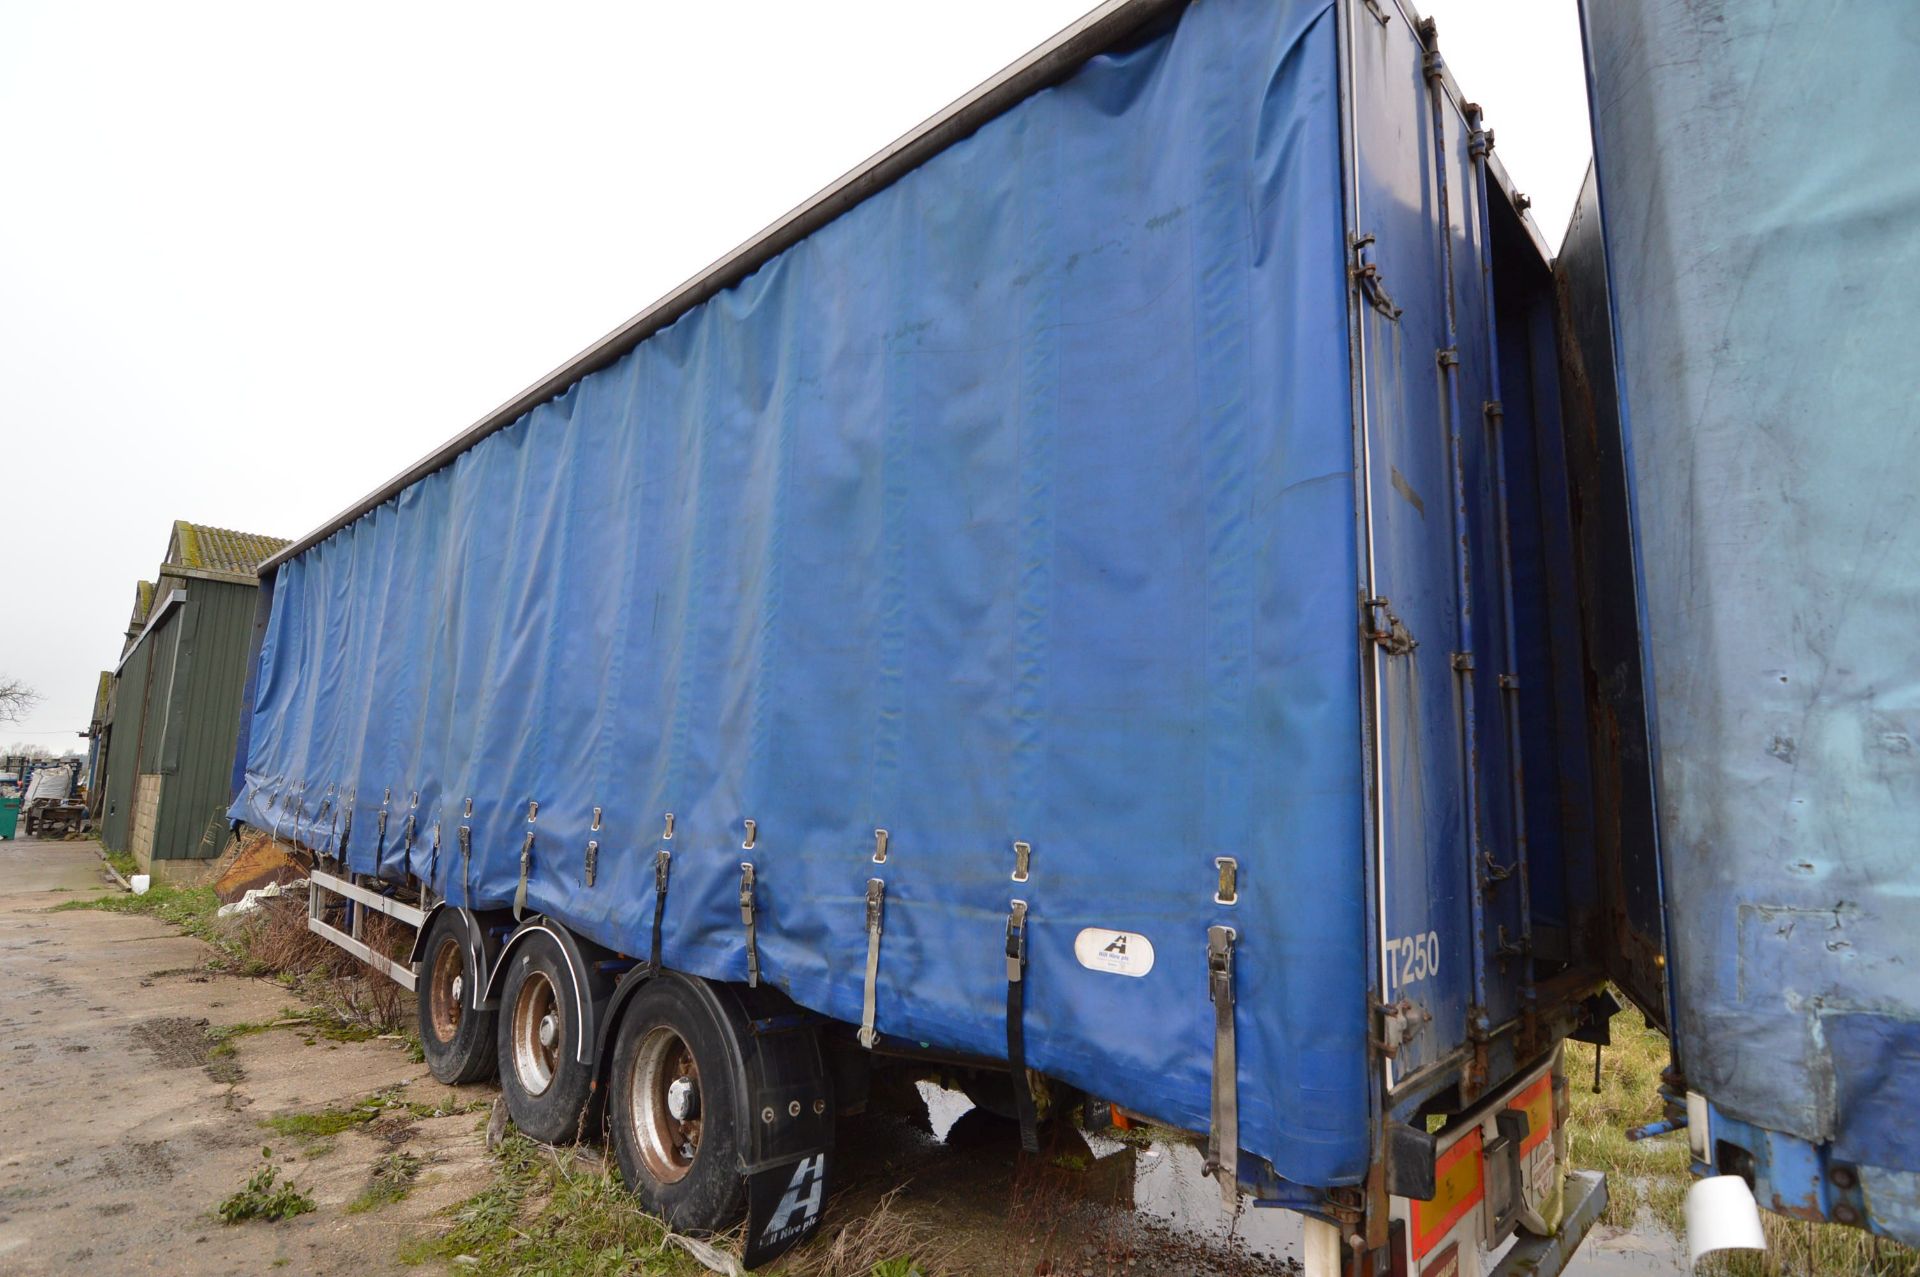 Crane Fruehauf CURTAINSIDED TRI-AXLE SEMI TRAILER, ident no. A257538, year of manufacture 1997, 36, - Image 2 of 3